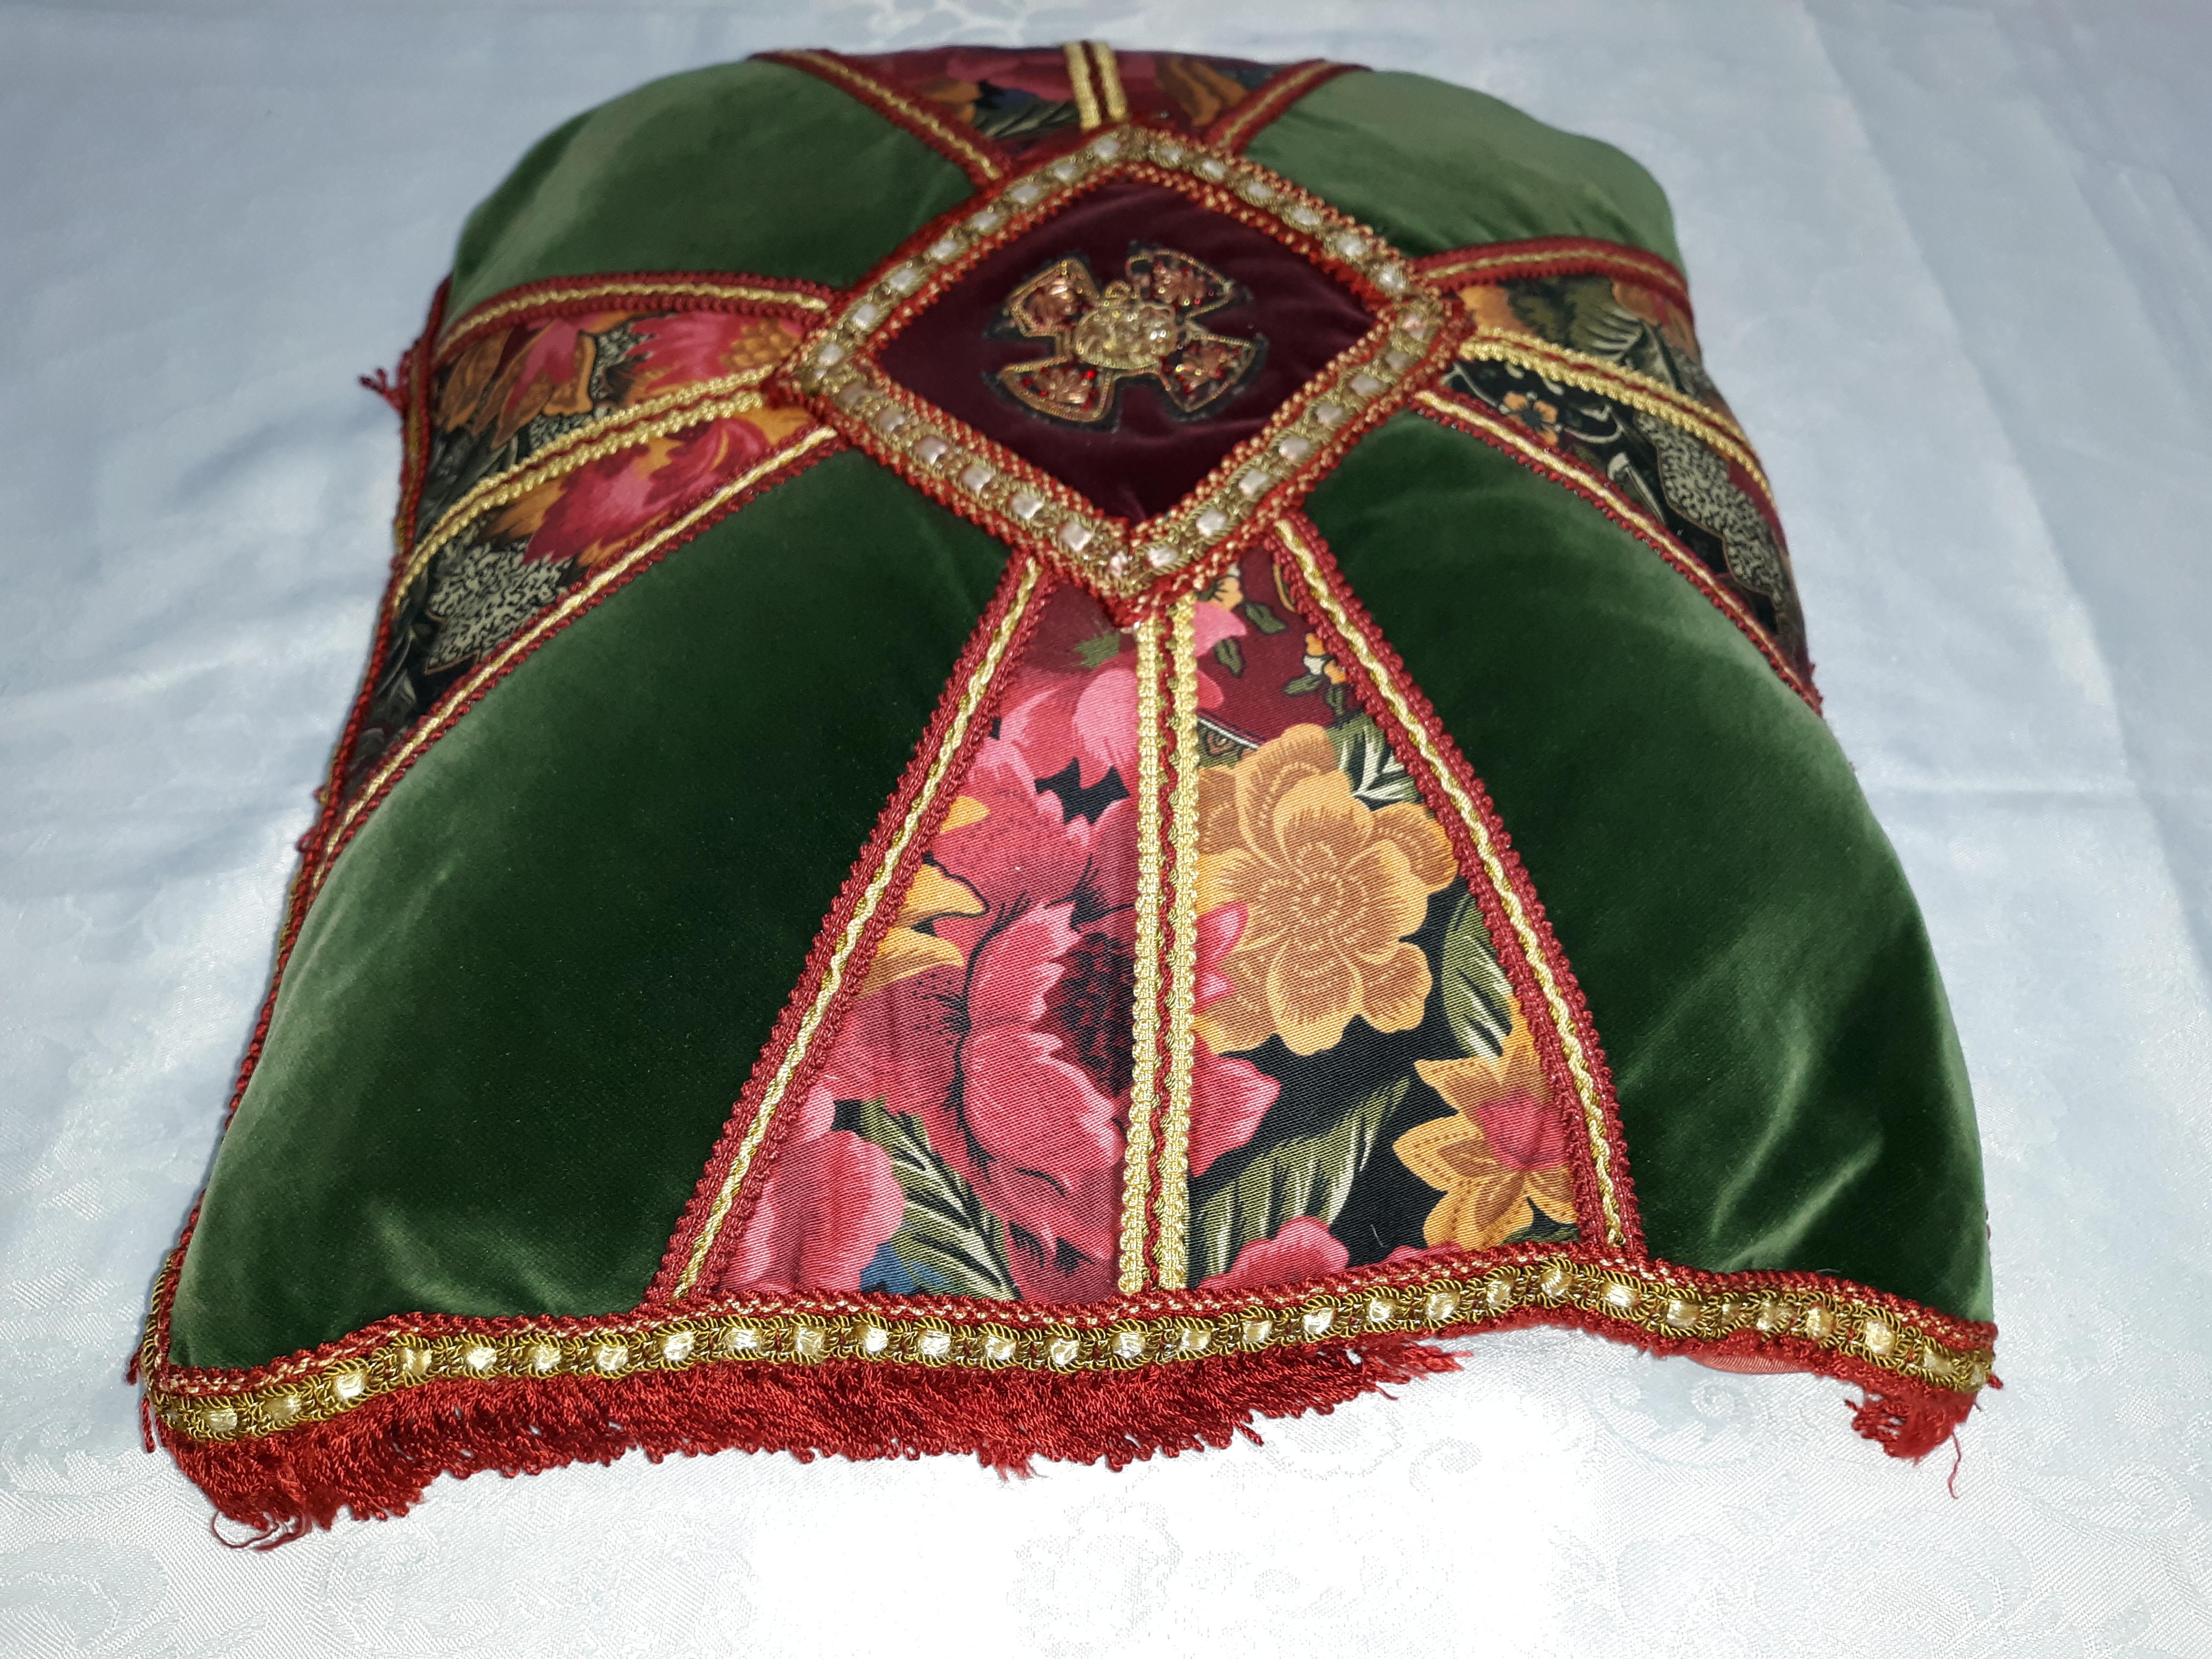 American Colonial Luois XVI Antique Embroidered Cushions Est. 1930 Green & Red Velvet For Sale